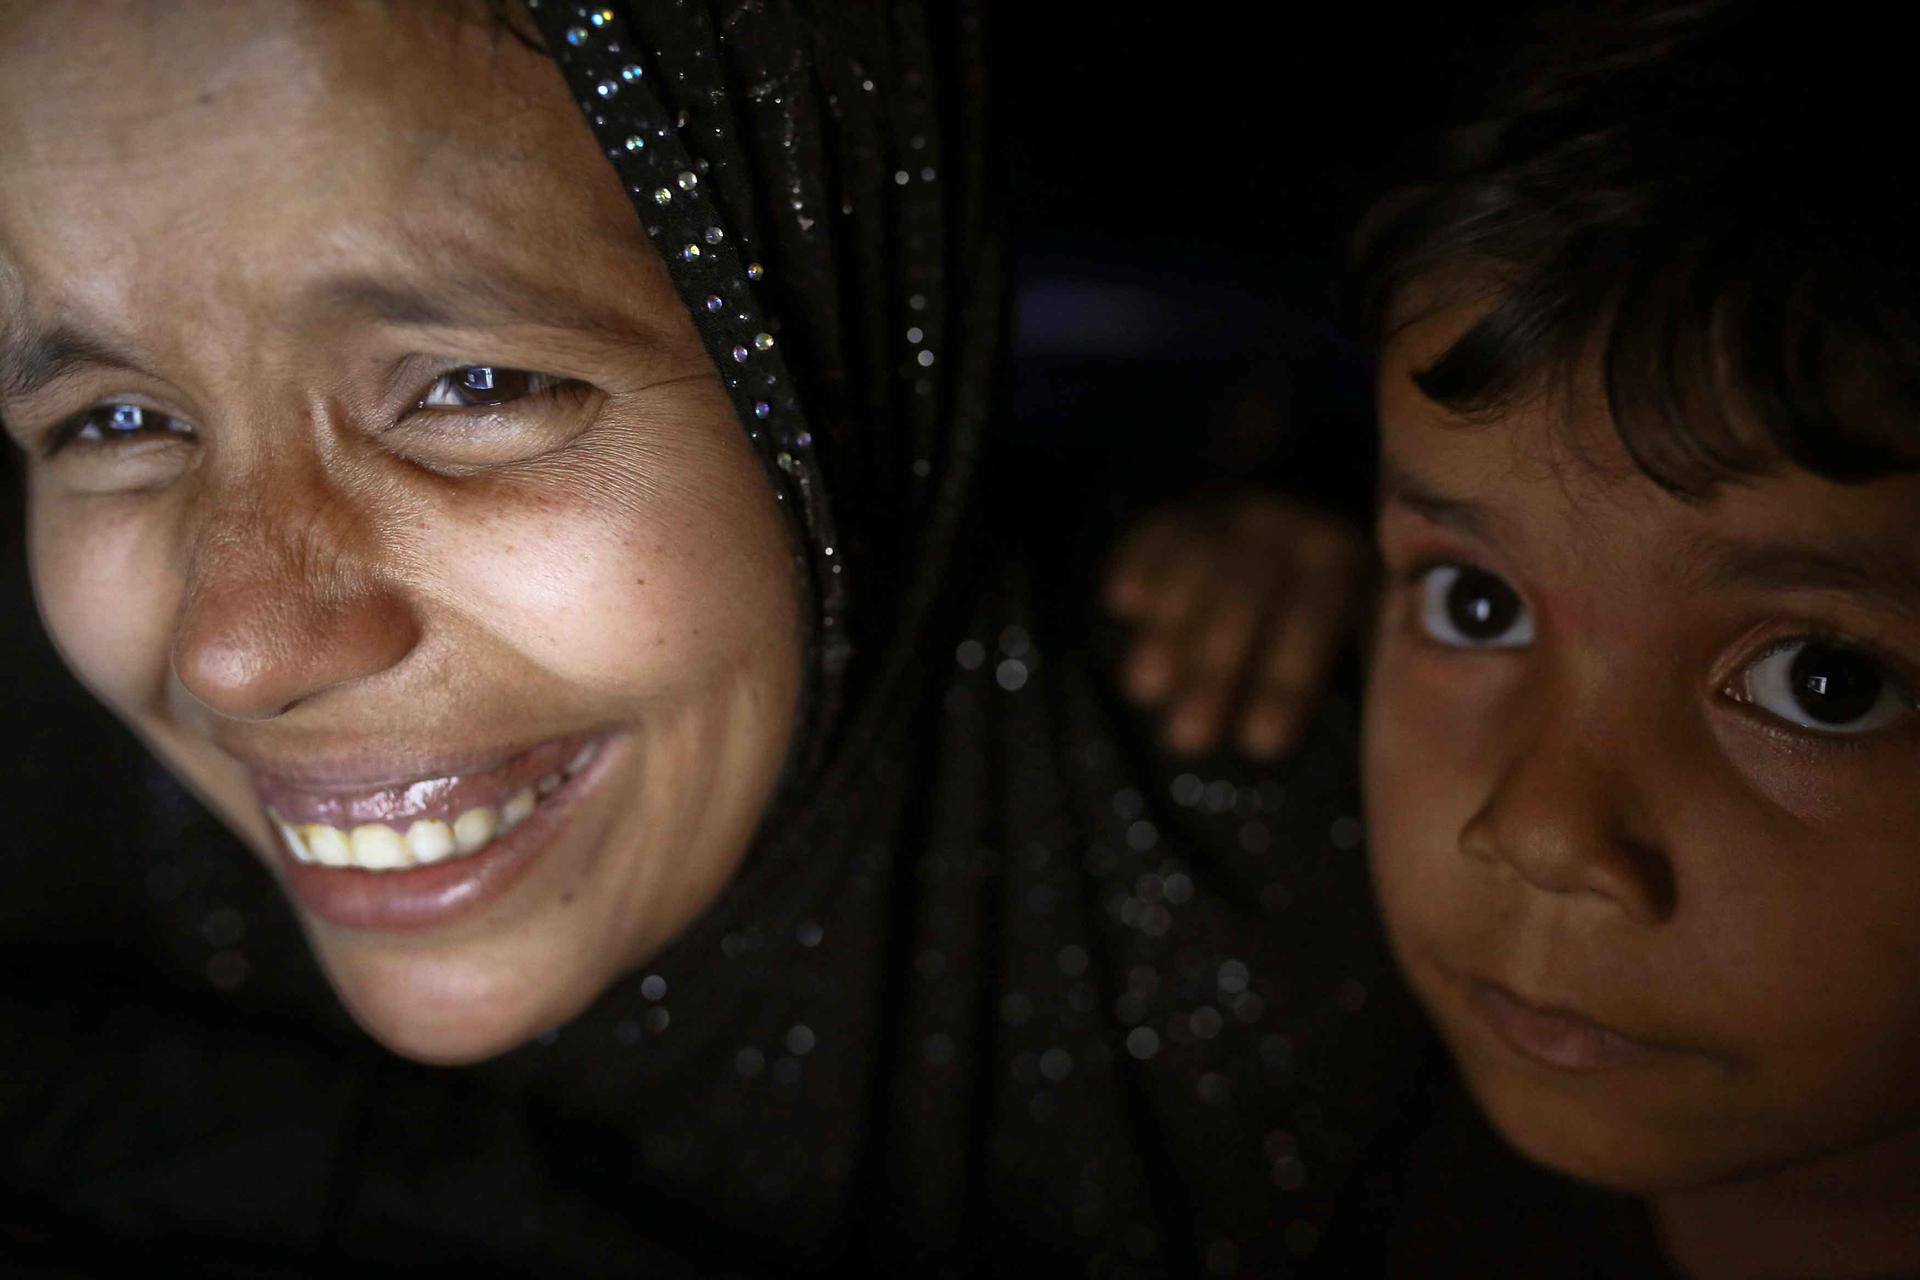 Noor, a 28-year-old Rohingya woman, jokes with her husband Muhammad Rafiq, 35, while their son Noor Kaidar listens. Rafiq has been working in Malaysia for 10 months; this is the fifth time they've spoken during that period. 